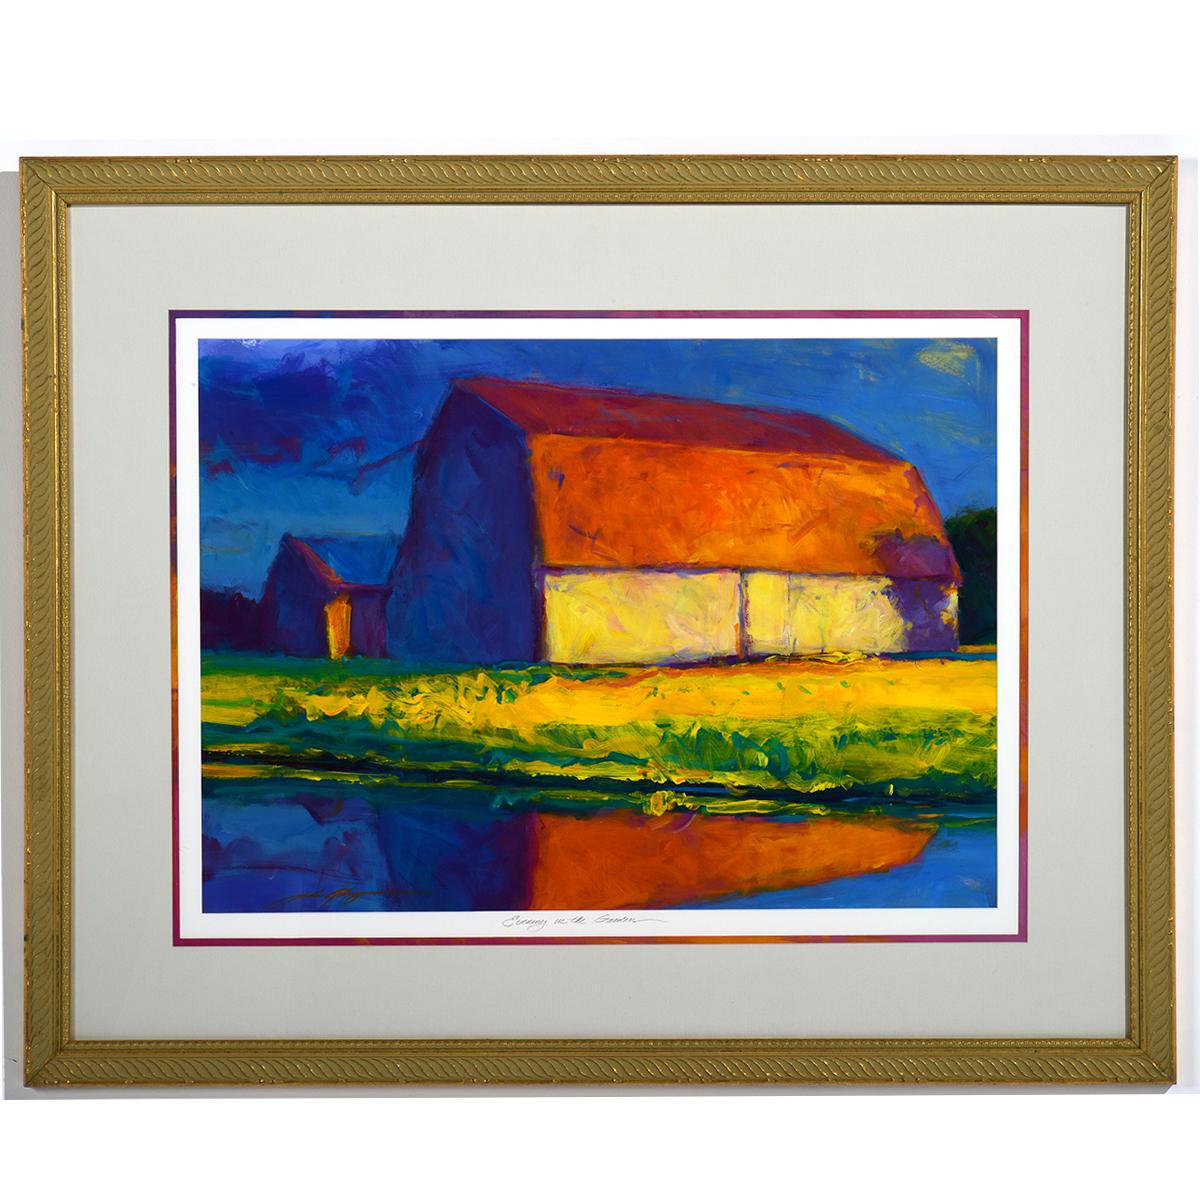 JOHN LOUIS KRIEGER Landscape Painting - "Evening in the Garden"  Bucolic Landscape with Barn in Blended Primary Colors